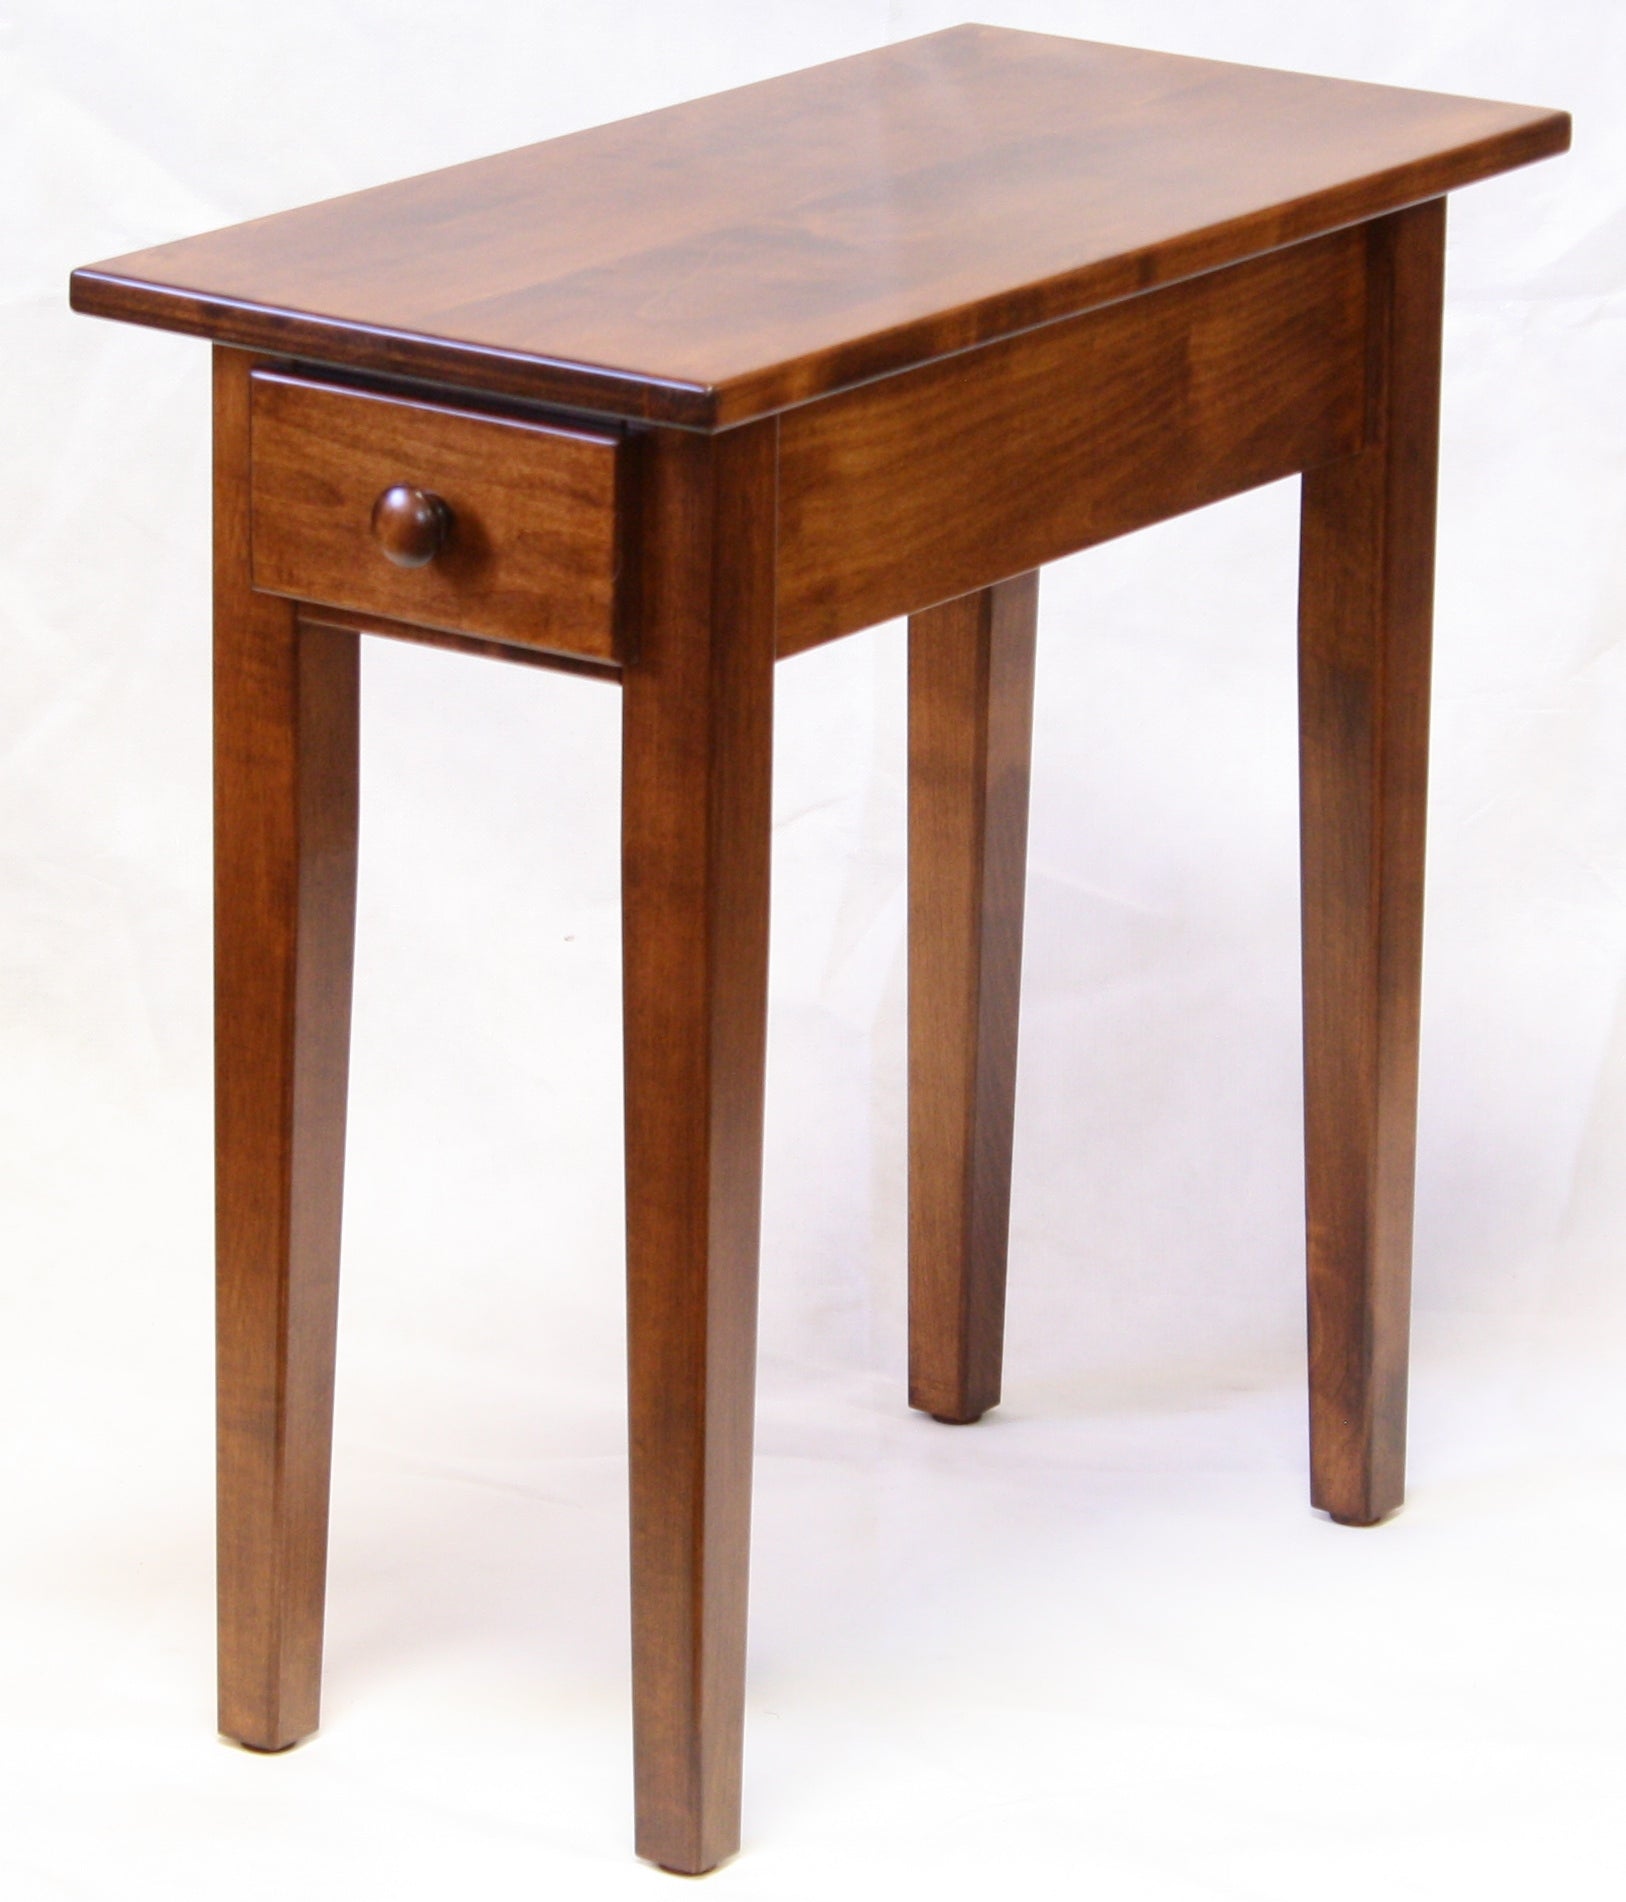 Narrow Cherry Shaker Chairside End Table with Drawer for smaller spaces